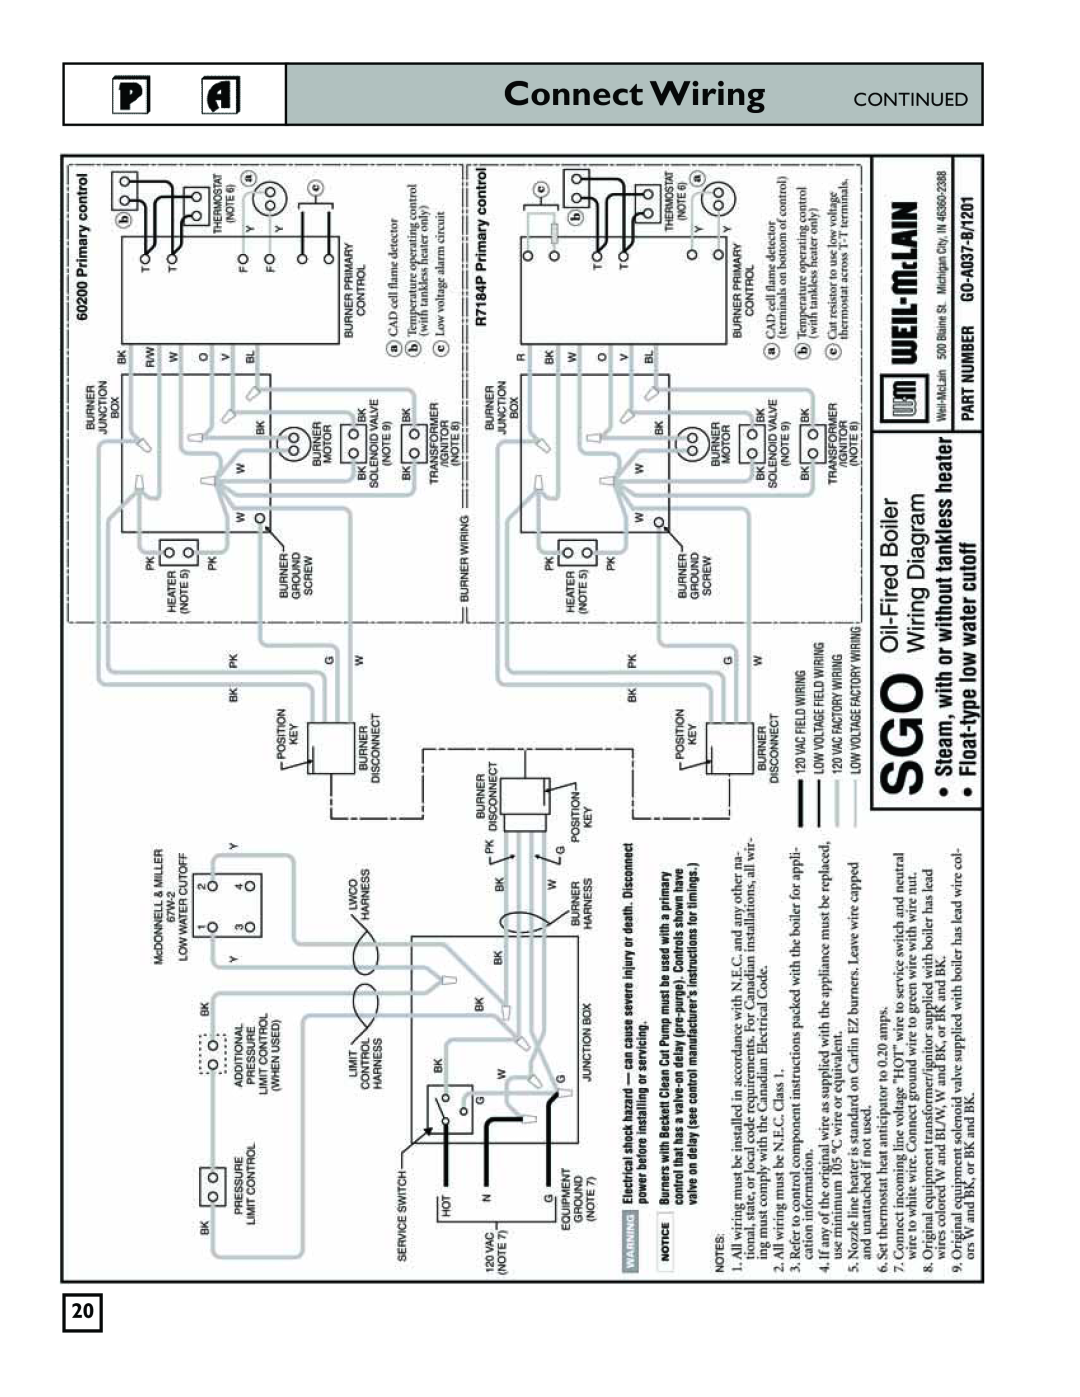 Weil-McLain 550-141-829/1201 manual Connect Wiring, Continued 